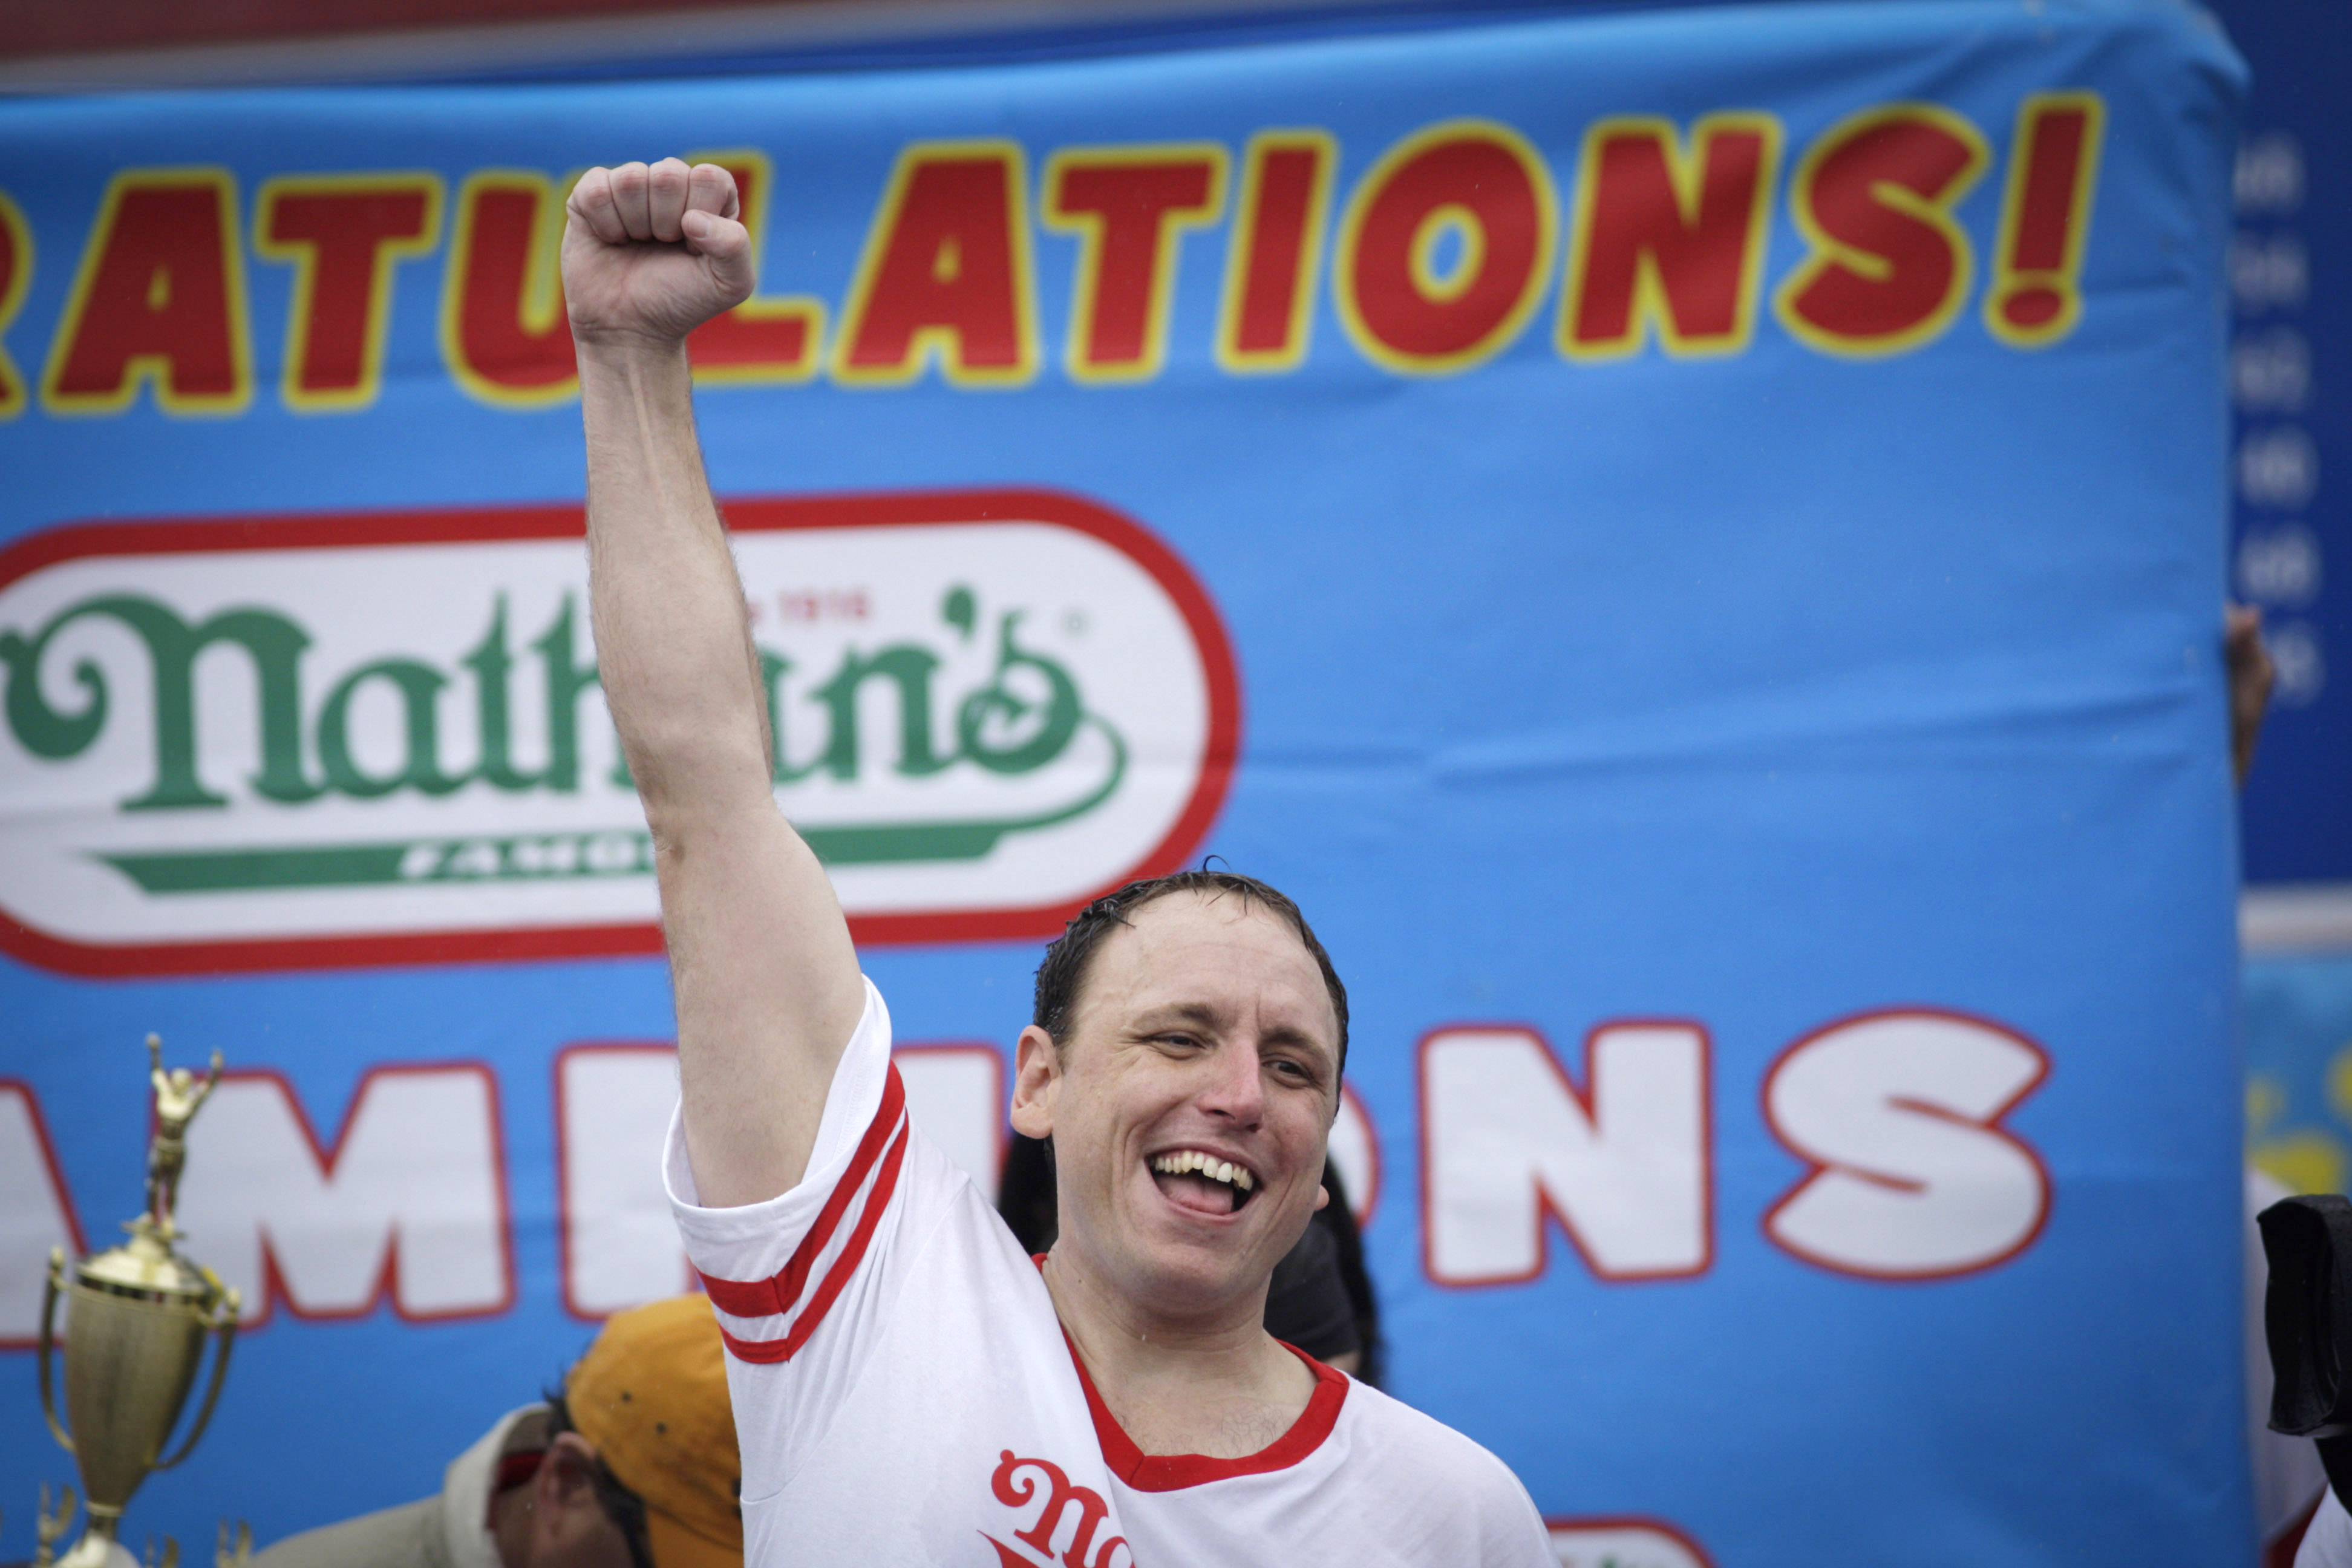 Champion Hot Dog Eater Joey Chestnut and 4th of July Dogs: By the Numbers